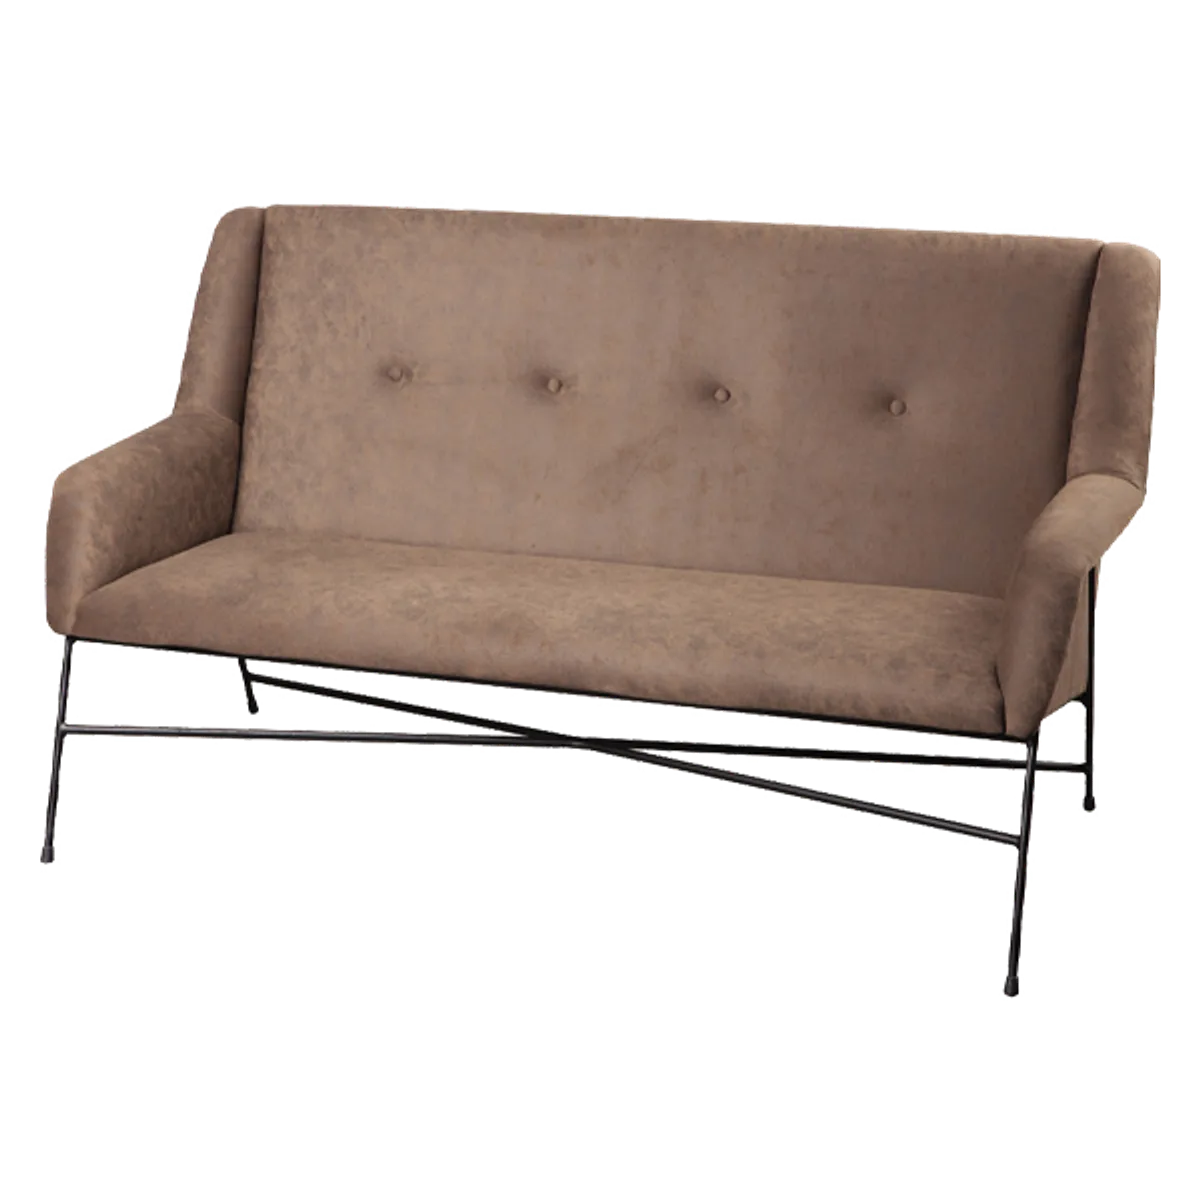 Mount Sofa Metal Frame 2 Seater Inside Out Contracts